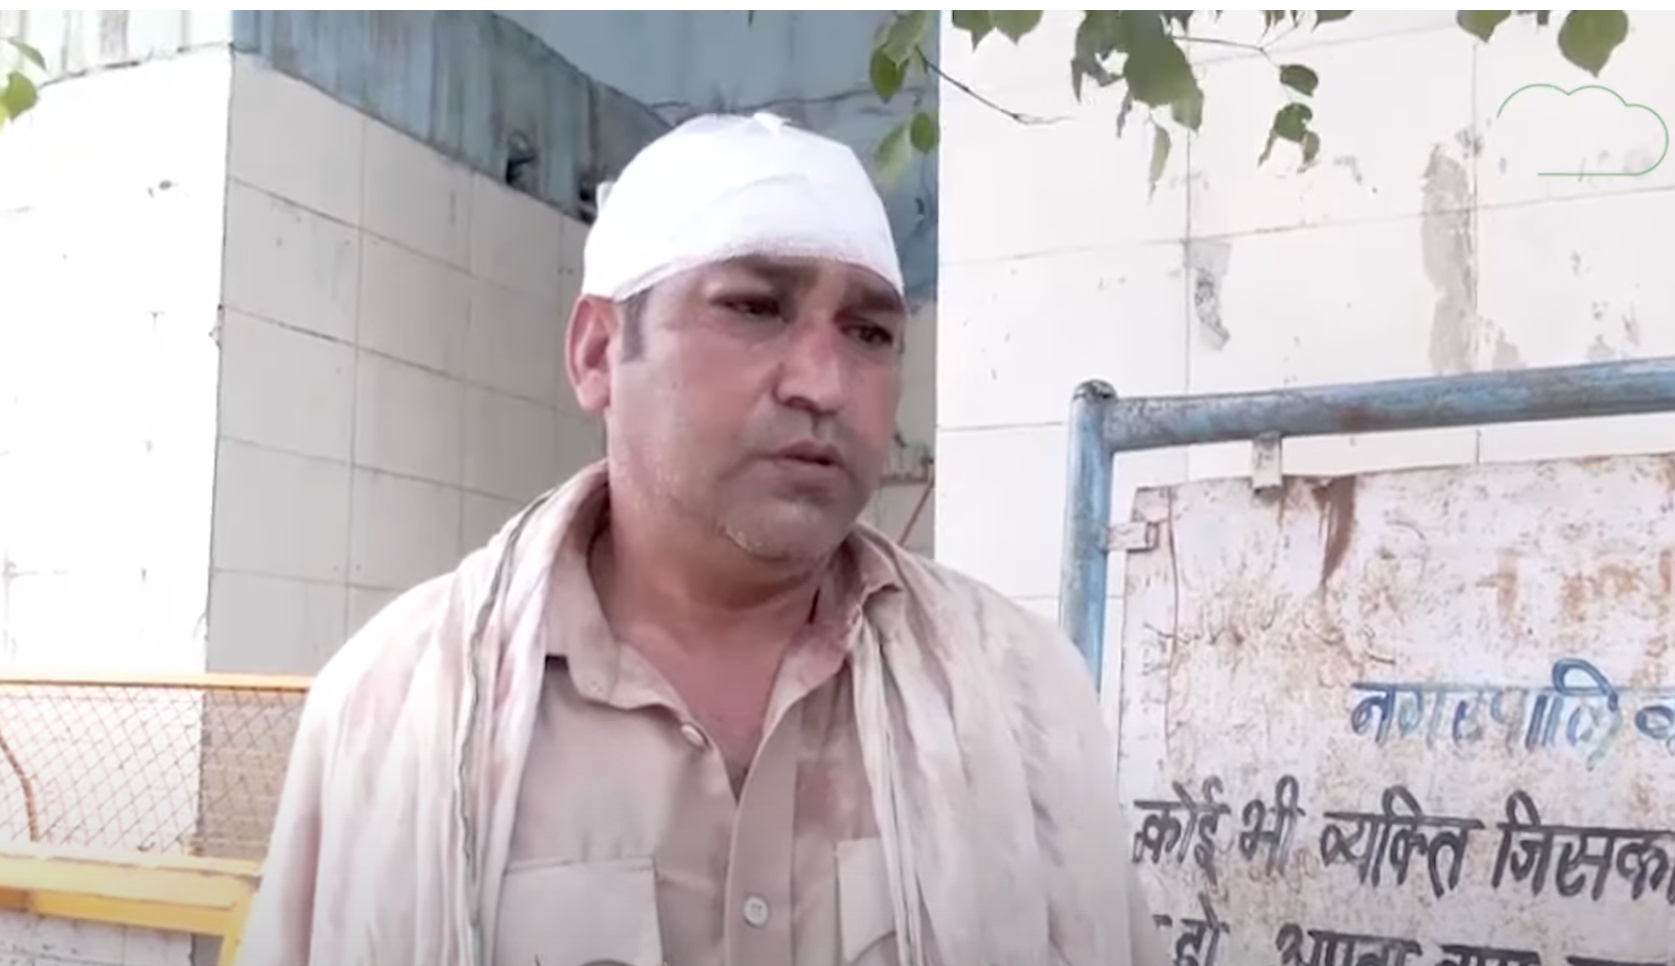 Haryana police SPO, injured during stone pelting at Nuh, talks about how the violence started against the Hindu religious procession, what the Muslim mob did